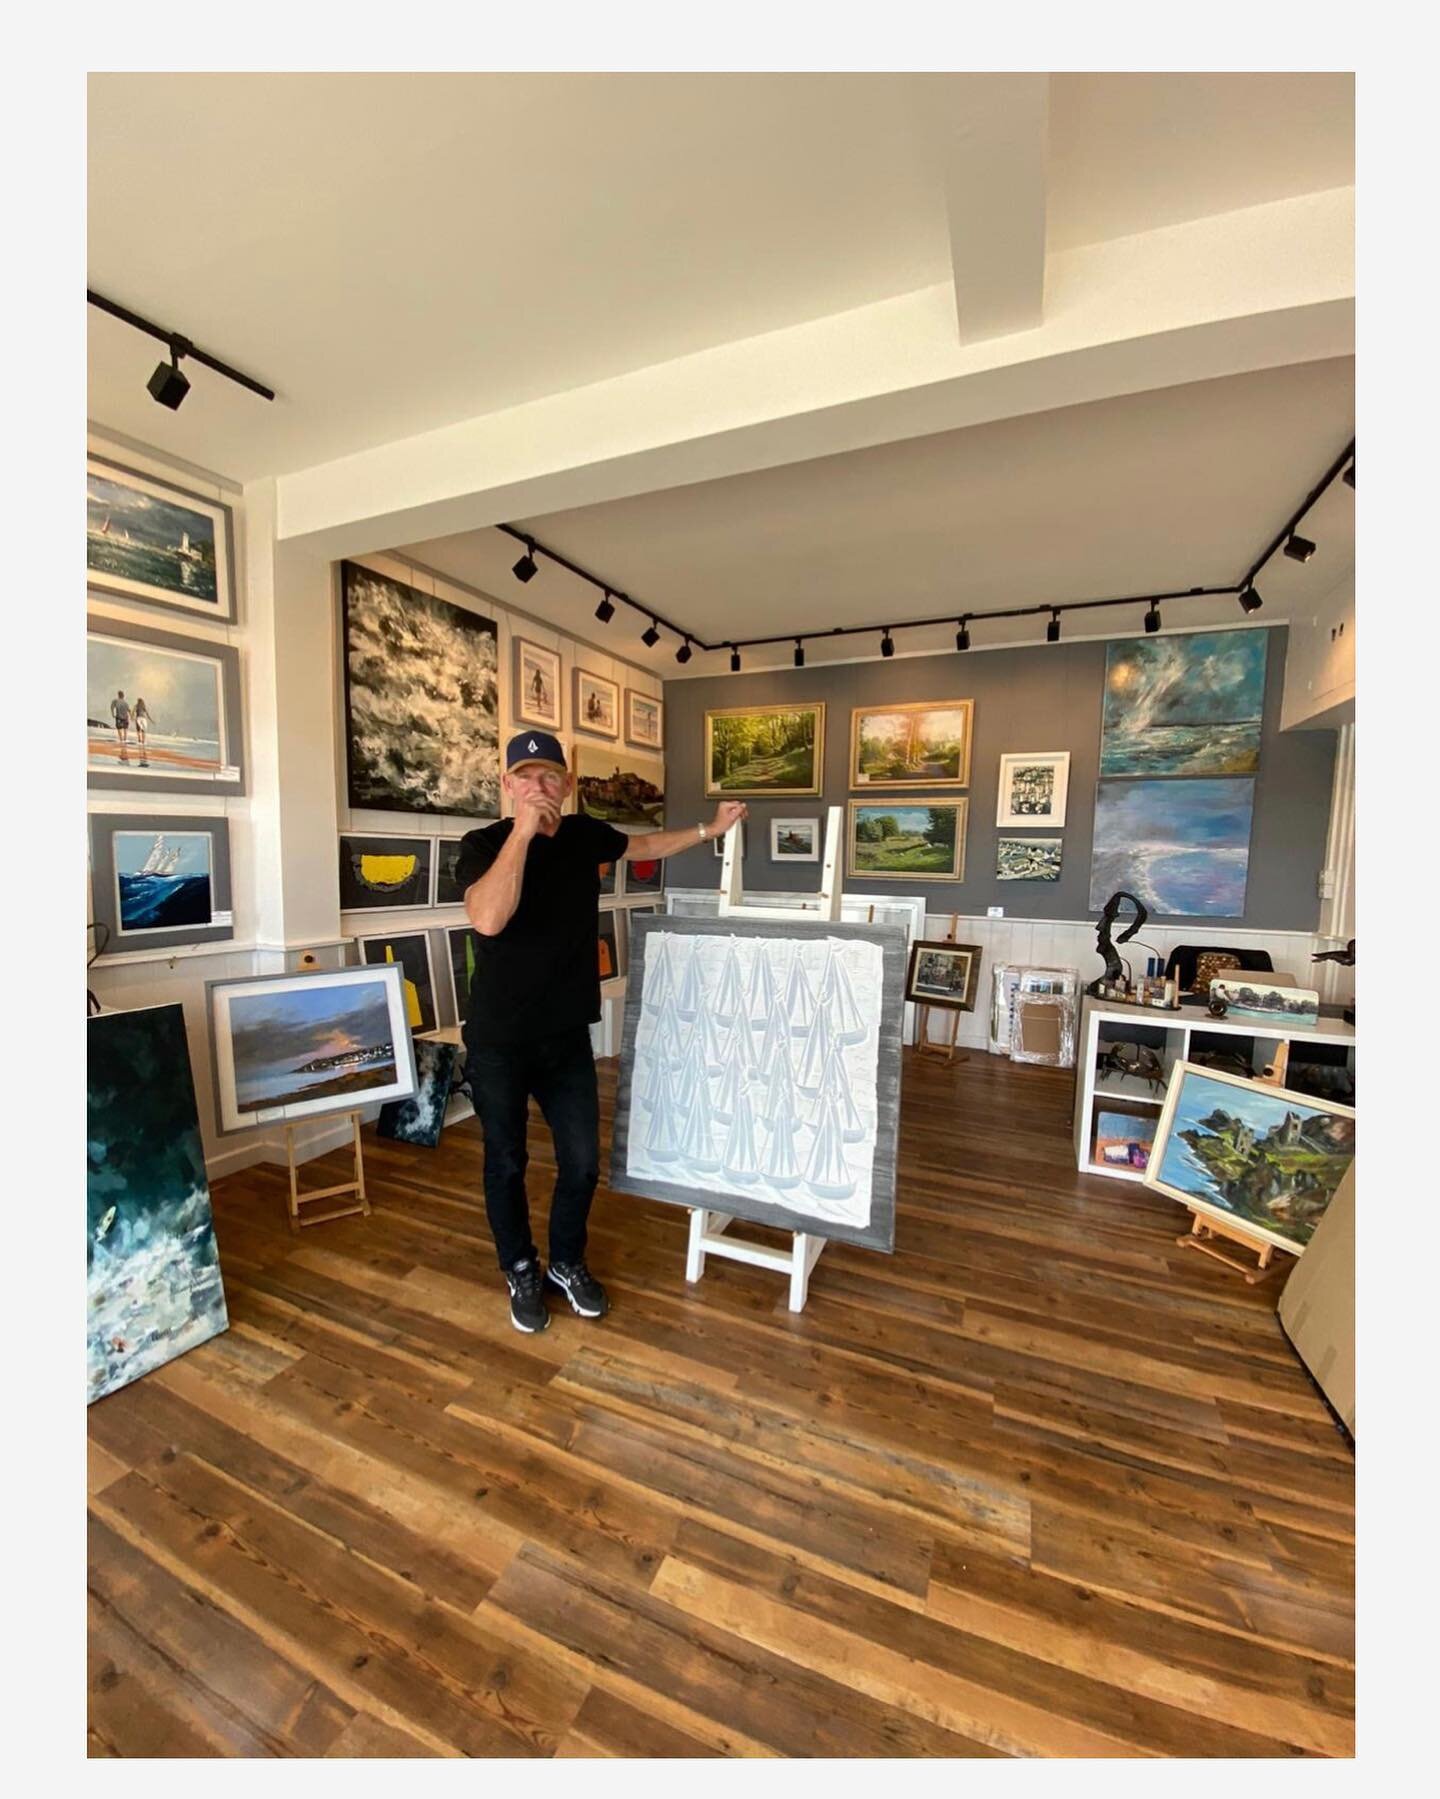 Martyn has been a successful artist for over 20 years. With each year that passes the paintings just get better and better and this is being recognised by the global galleries now showcasing his work. Please go to the bio and click the website for a 